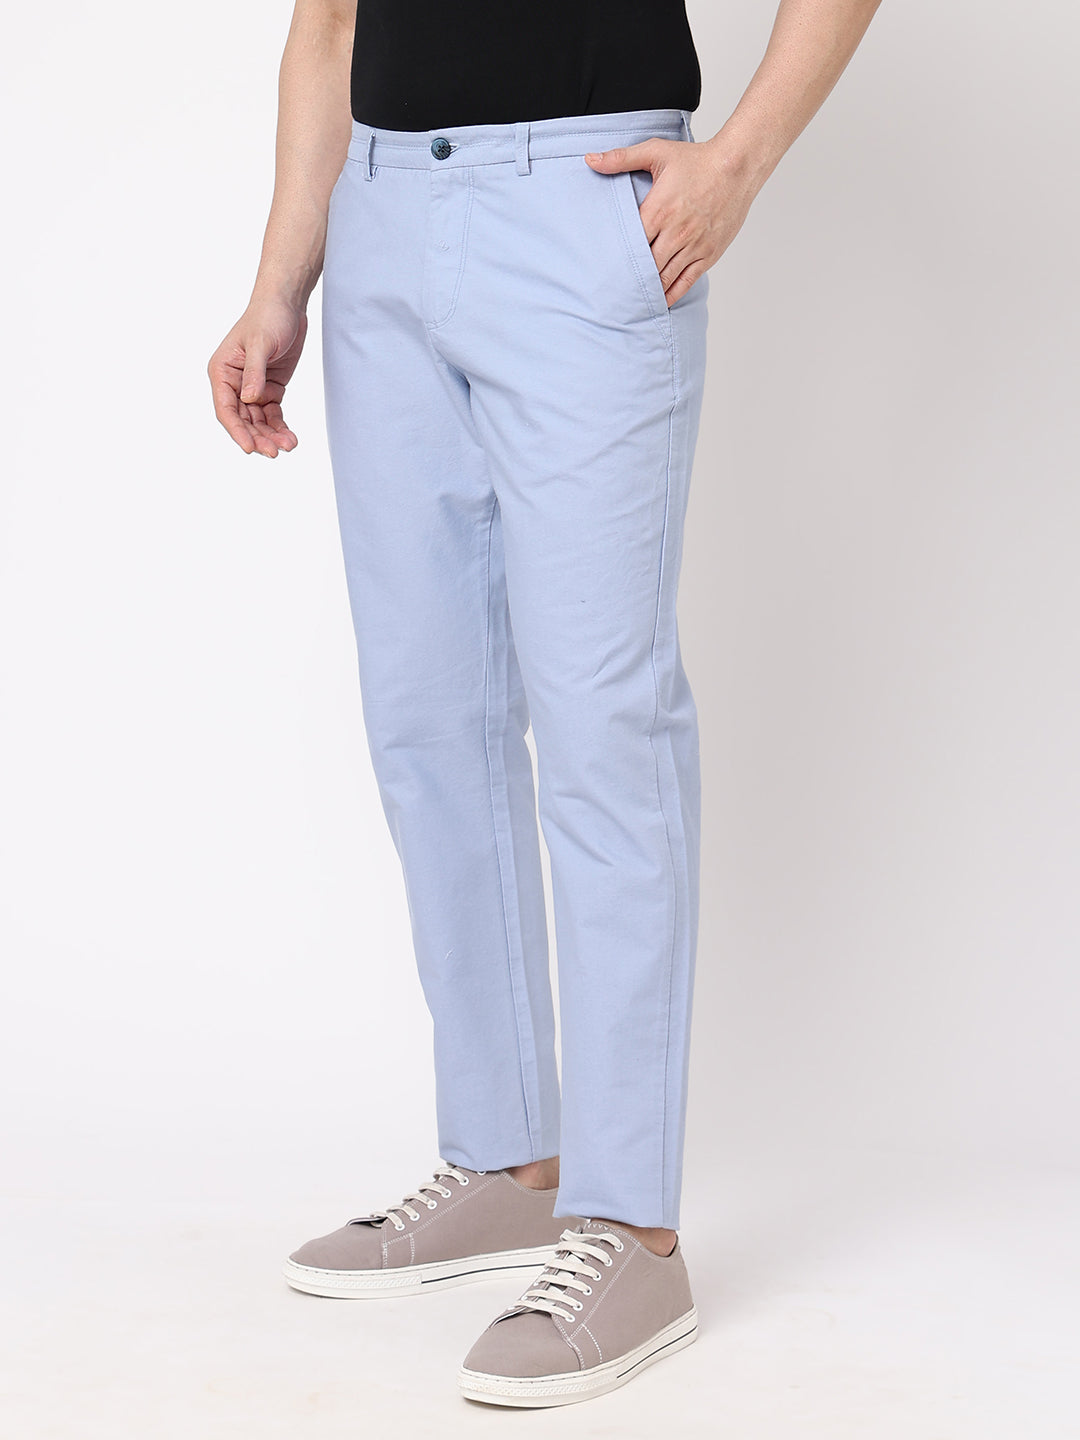 Mens Cotton Pant, for Comfortable, Easy Washable, Occasion (Style Type) :  Causal at Best Price in Chengalpattu